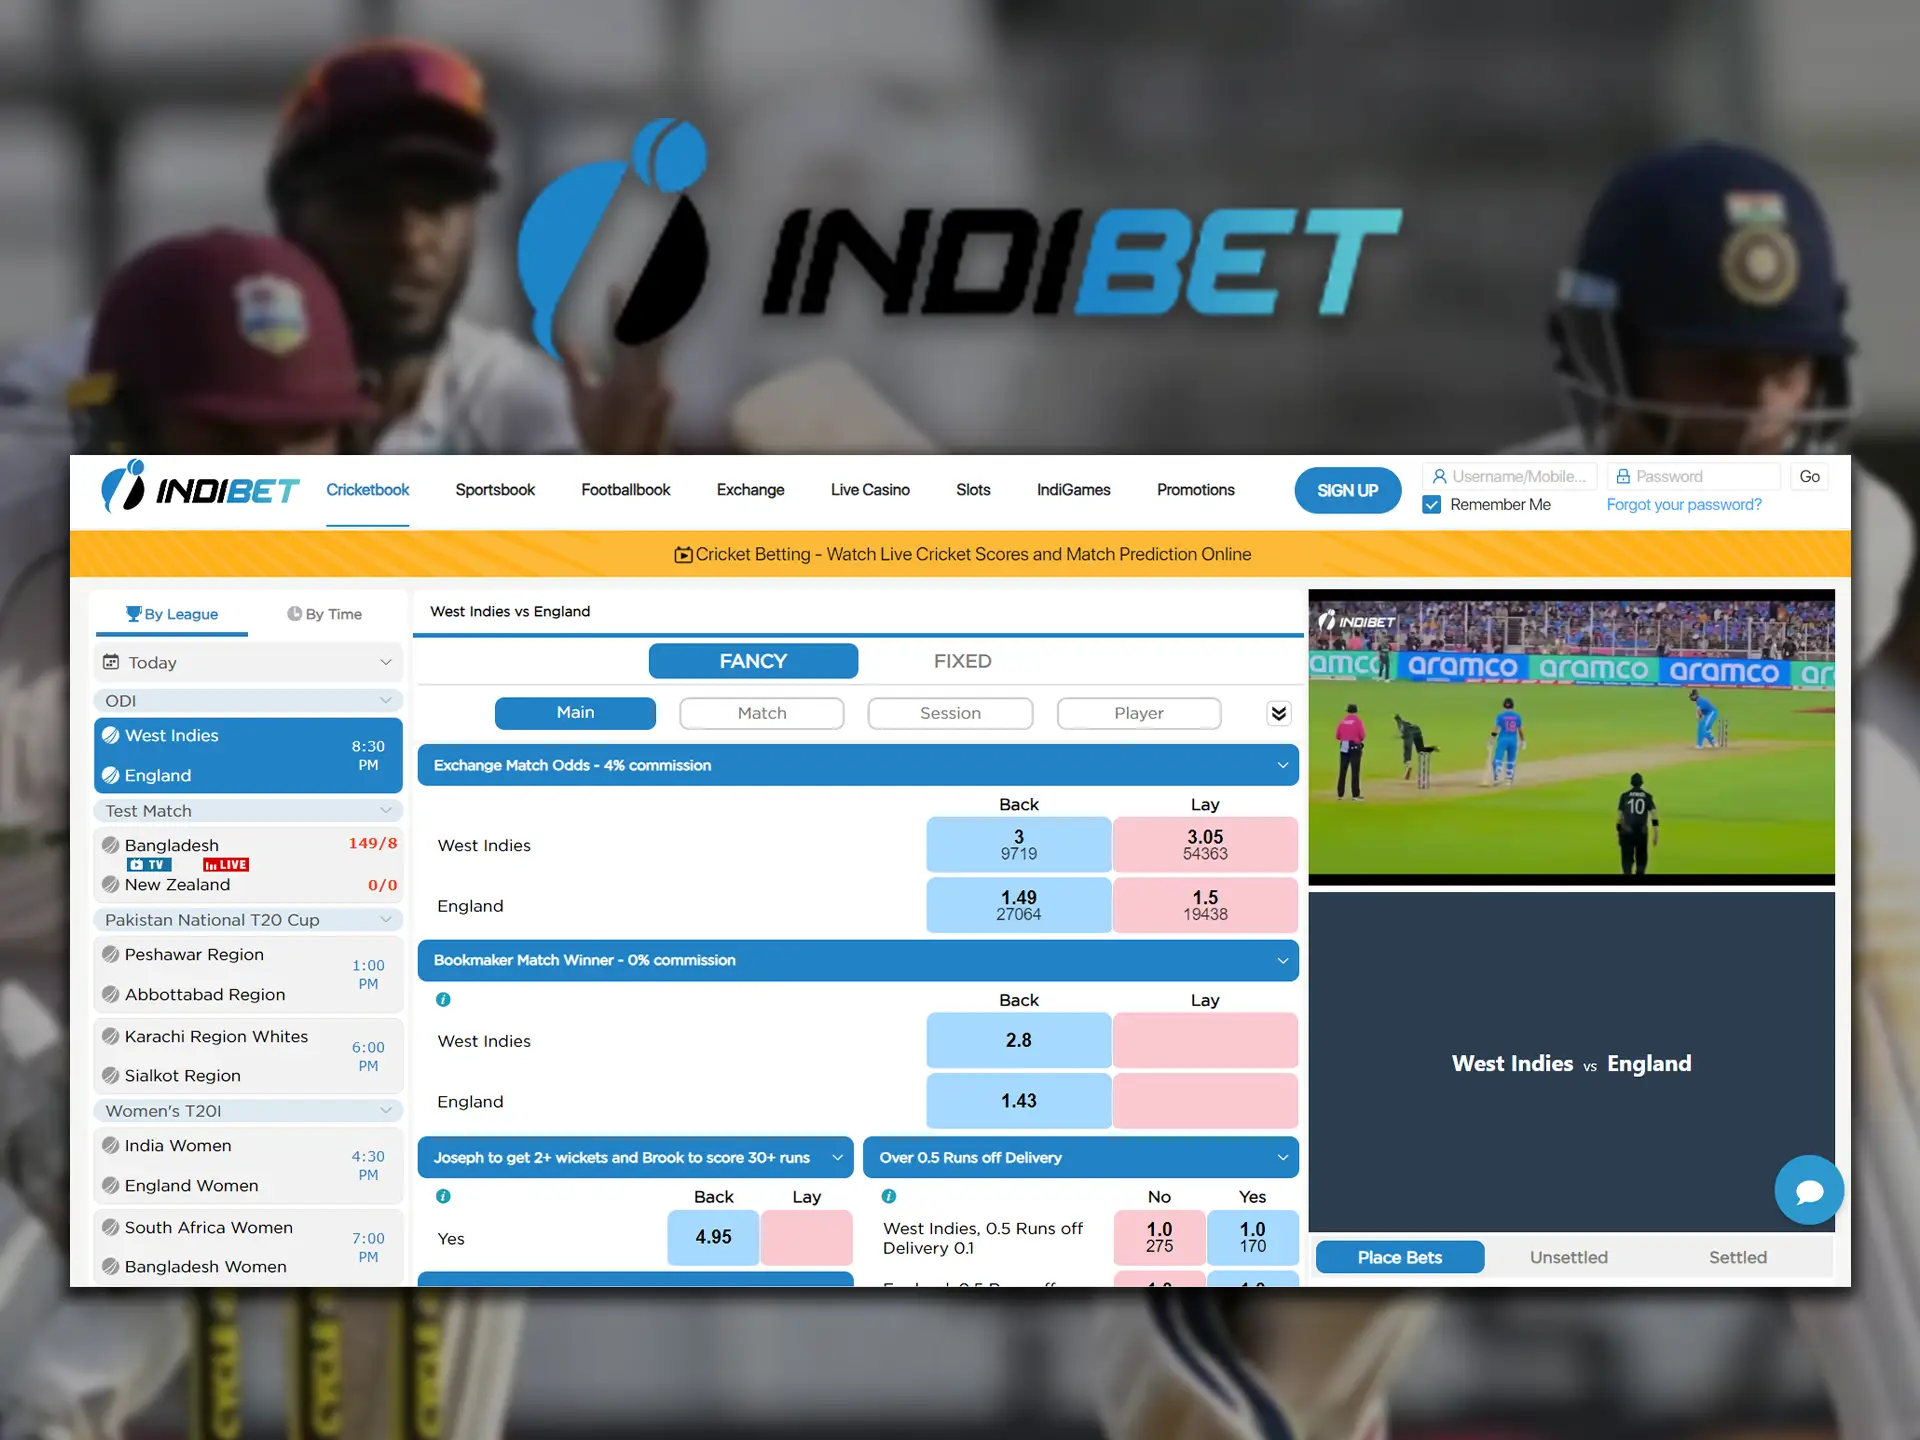 Indibet covers all popular cricket events for betting and is popular in India.